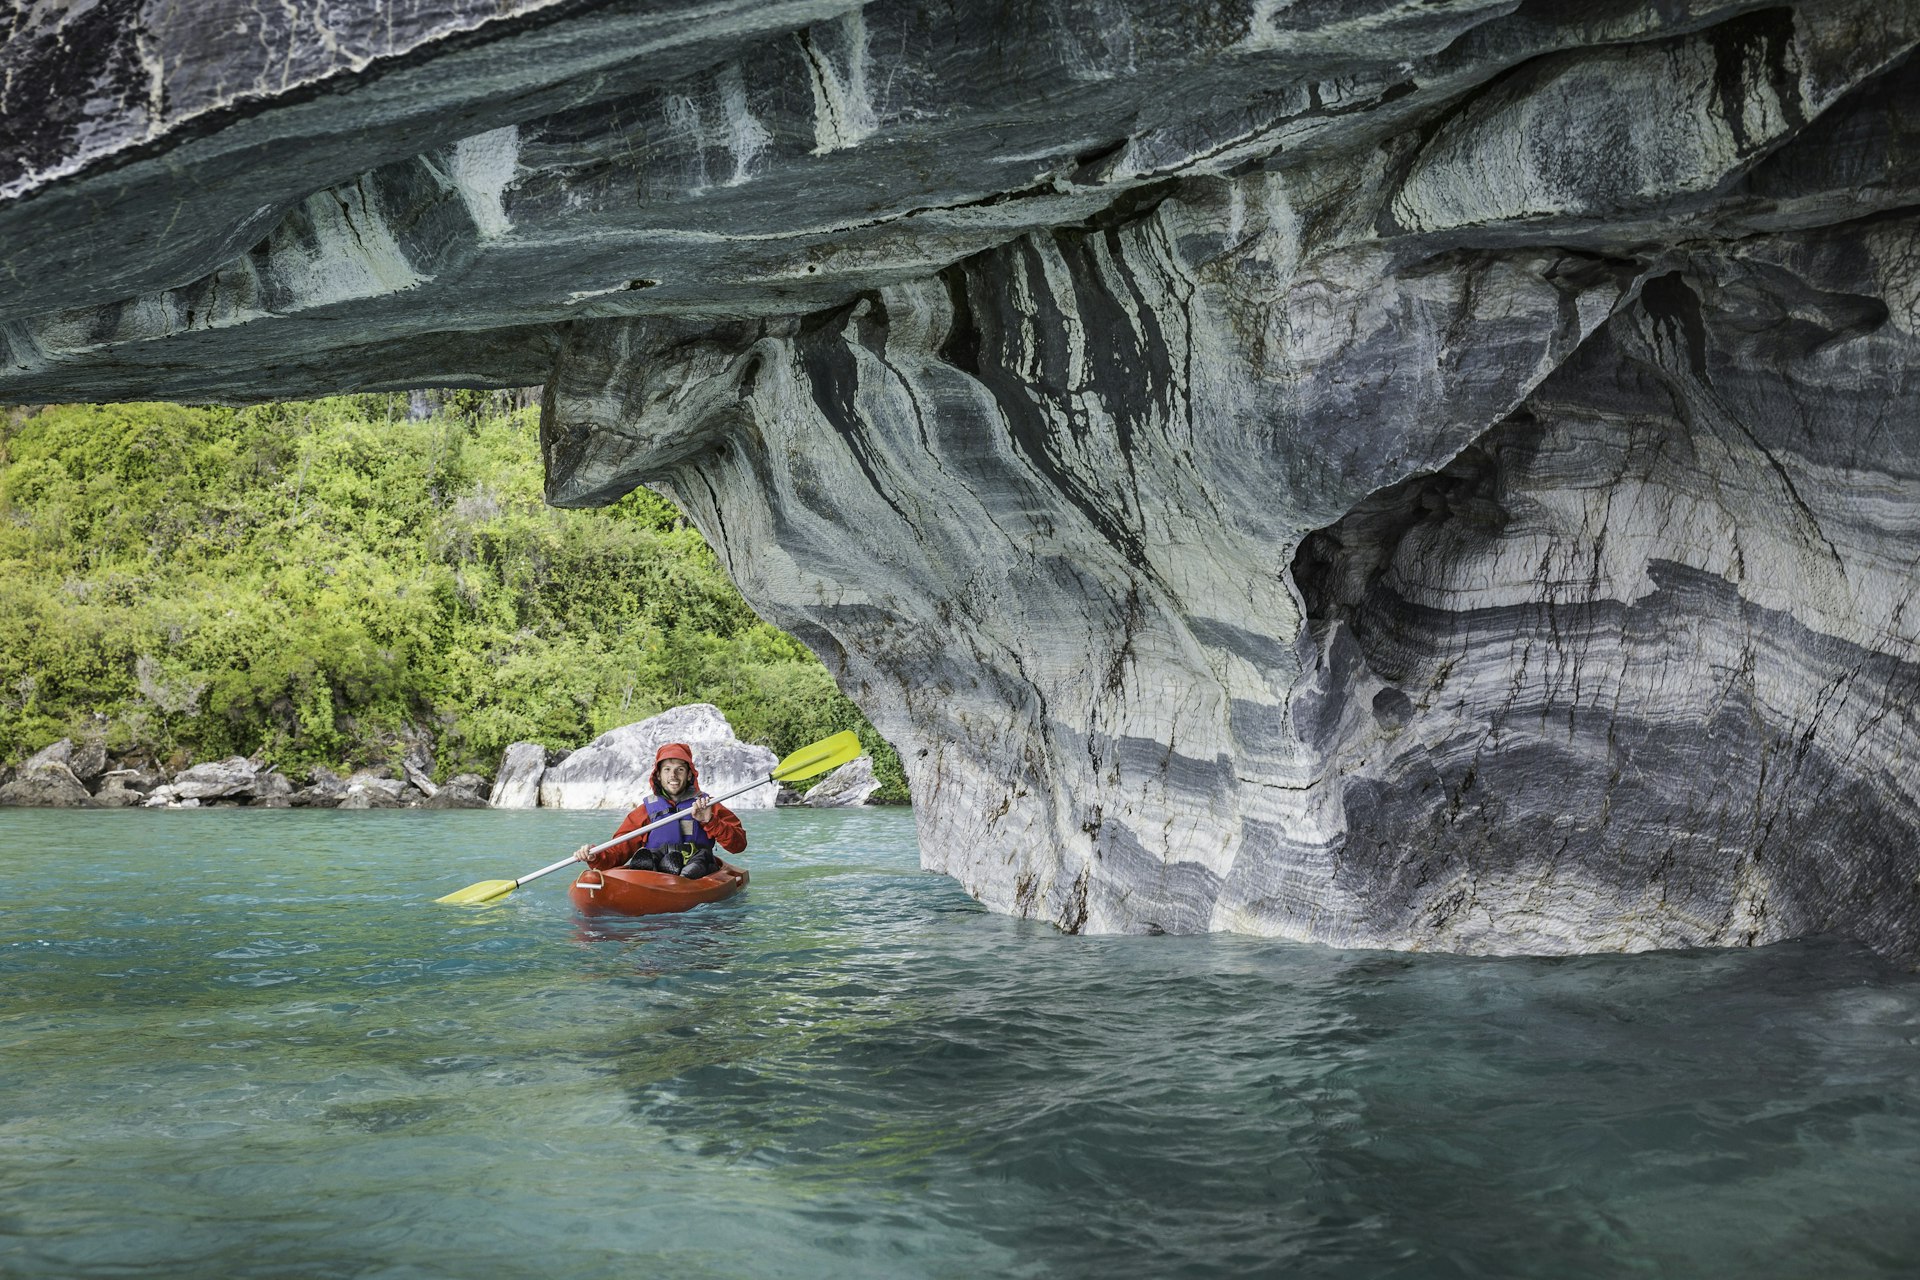 A kayaker leaves turquoise waters and enters a cave with grey and white streaked rocks